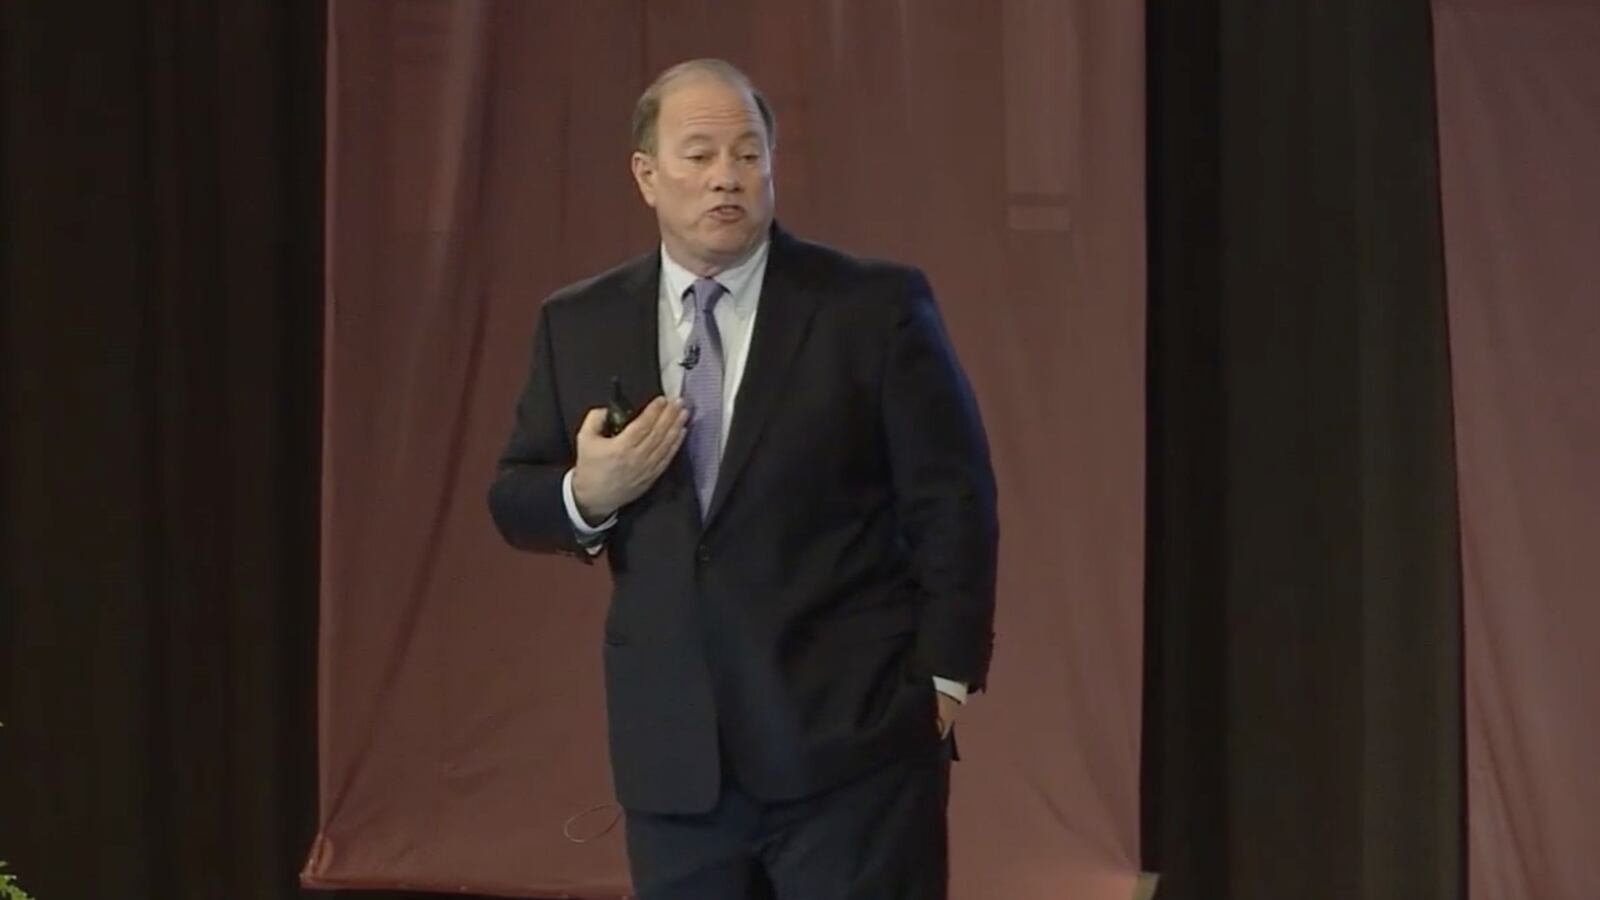 Detroit Mayor Mike Duggan delivers State of the City Address, March 6, 2018.